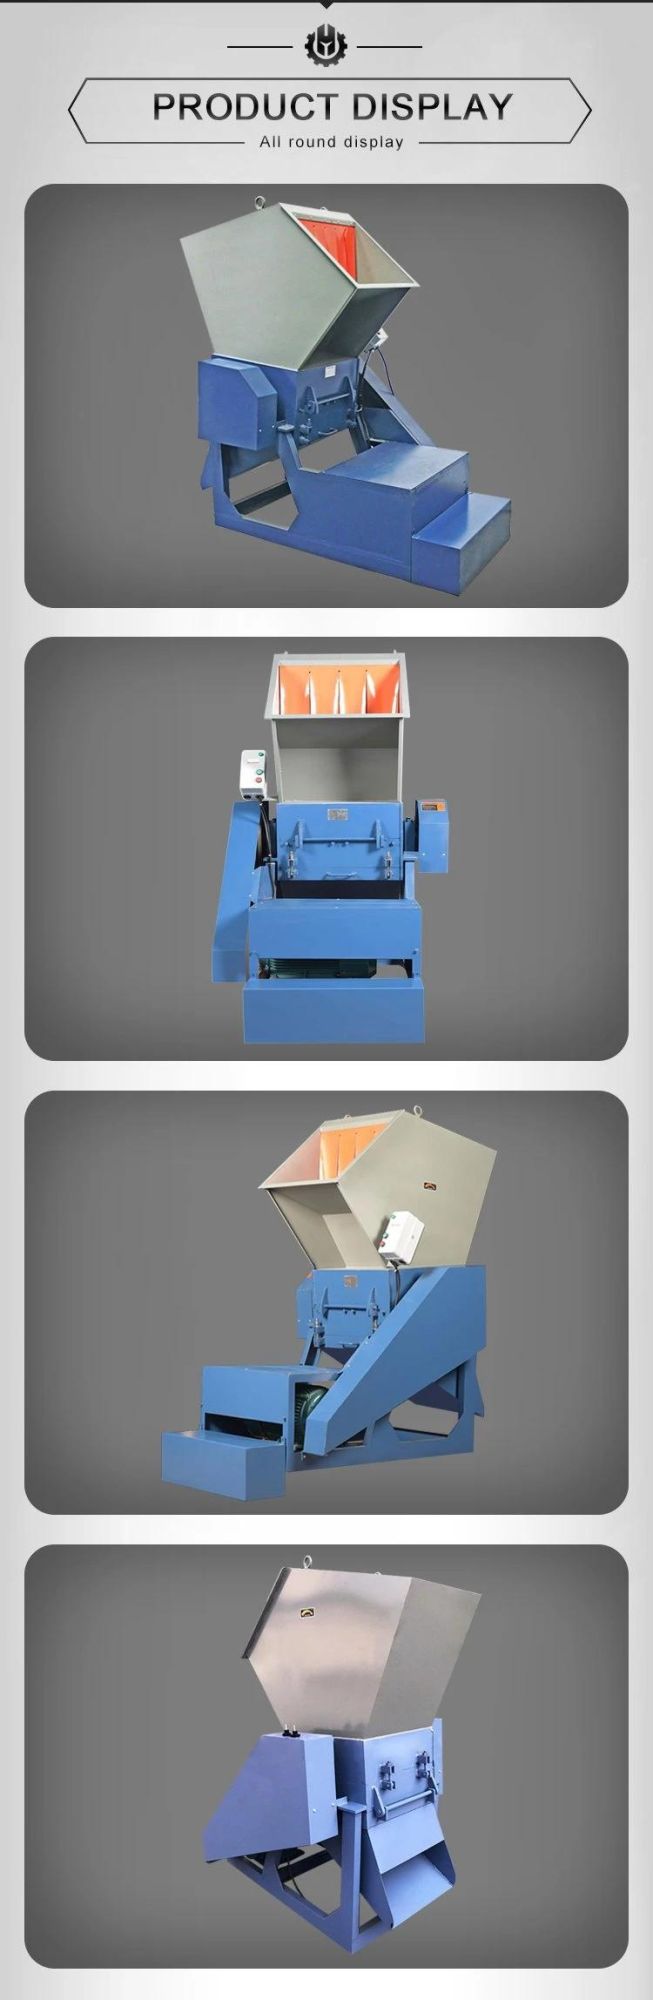 Hollow Plastic Crusher for Hard and Soft Plastics Grind Block Crushing and Recycling Machine